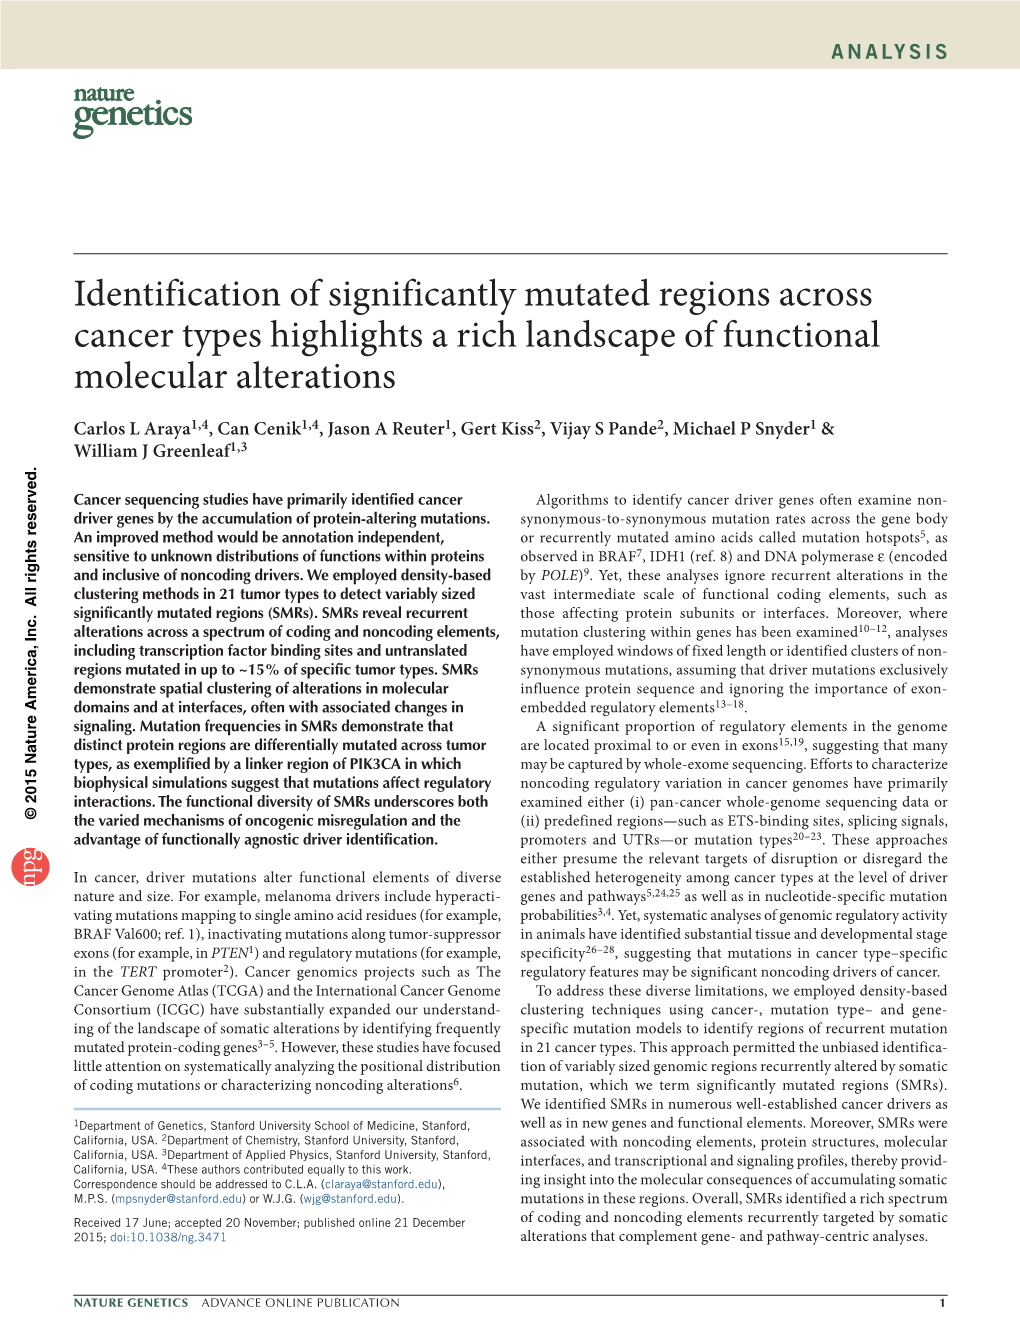 Identification of Significantly Mutated Regions Across Cancer Types